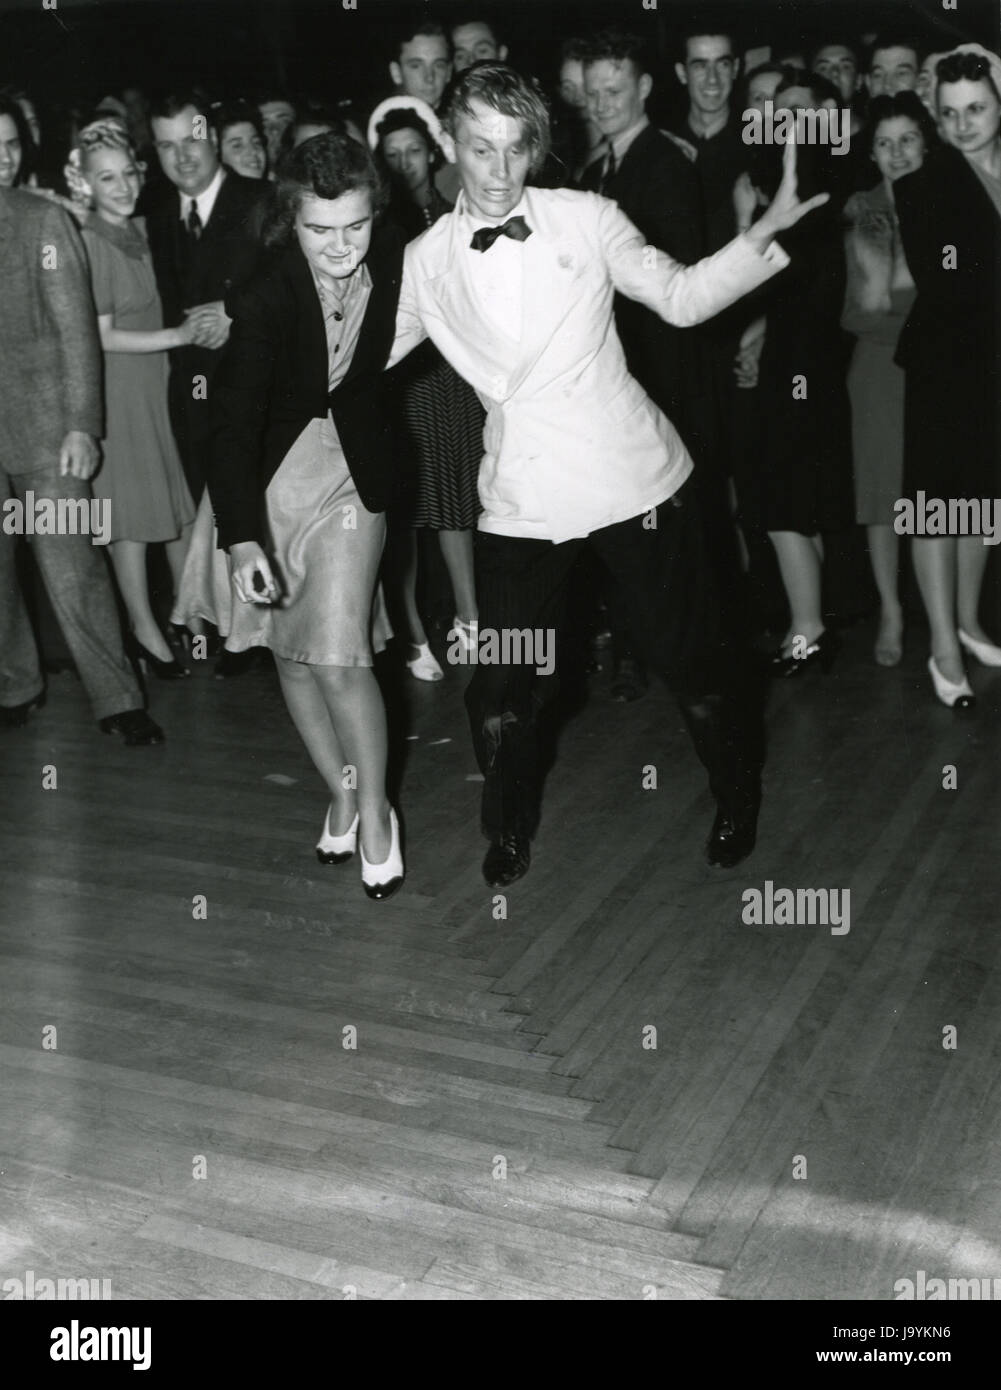 Oakland, California, Apri 26, 1940 - A spontaneous jitterbug exhibition in the middle of the dance floor at a Benny Goodman concert at Oakland Dance Hall. Stock Photo